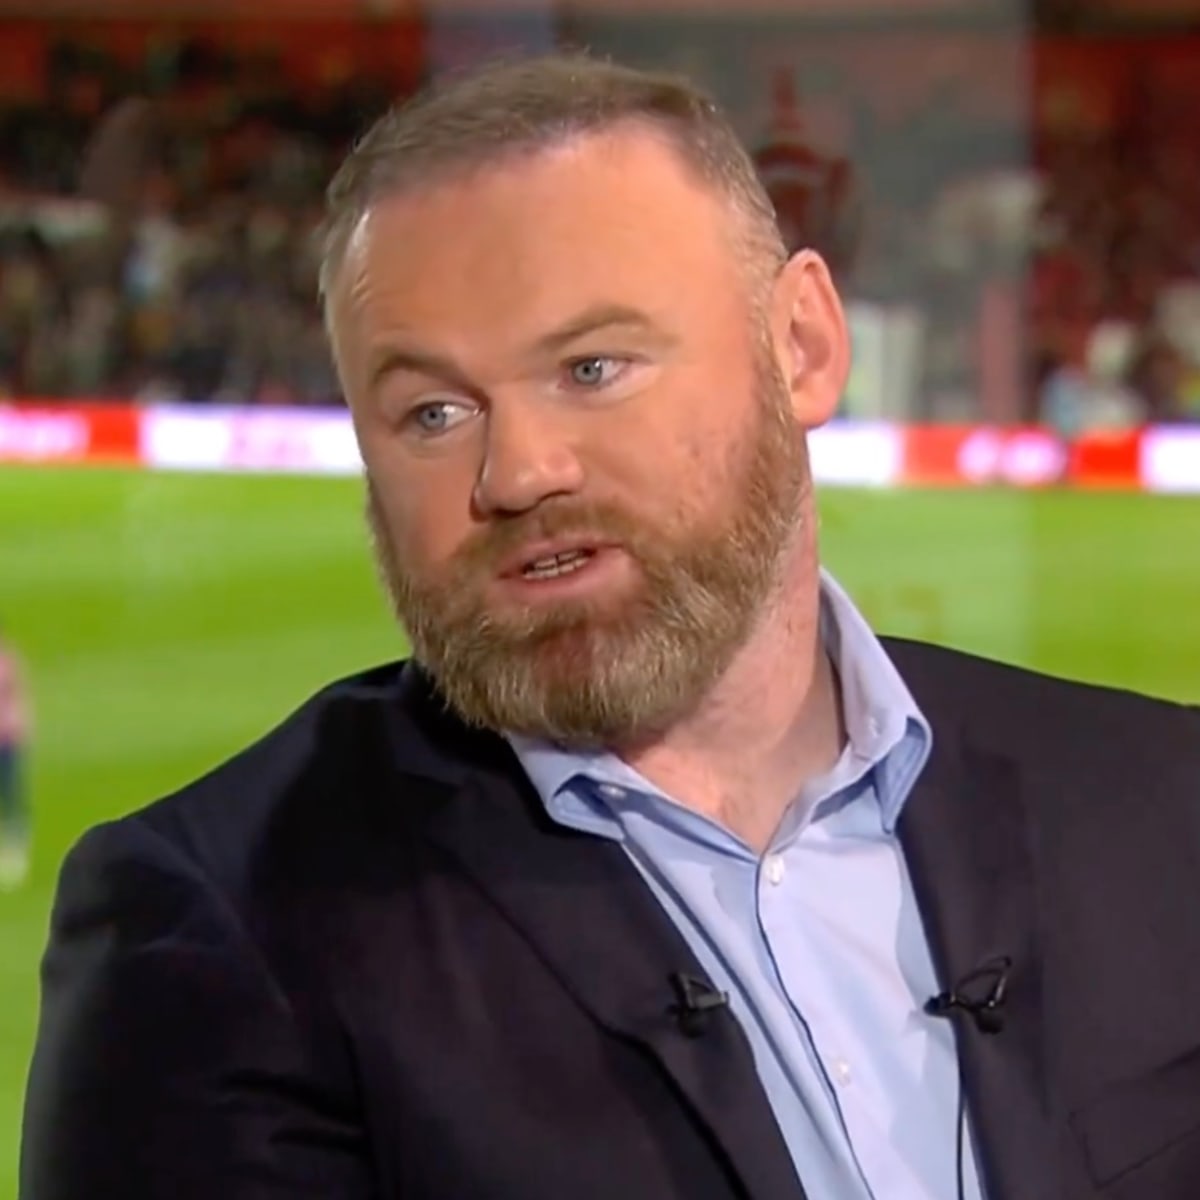 Wayne Rooney aims to manage Man United or Everton within 10 years - Futbol  on FanNation